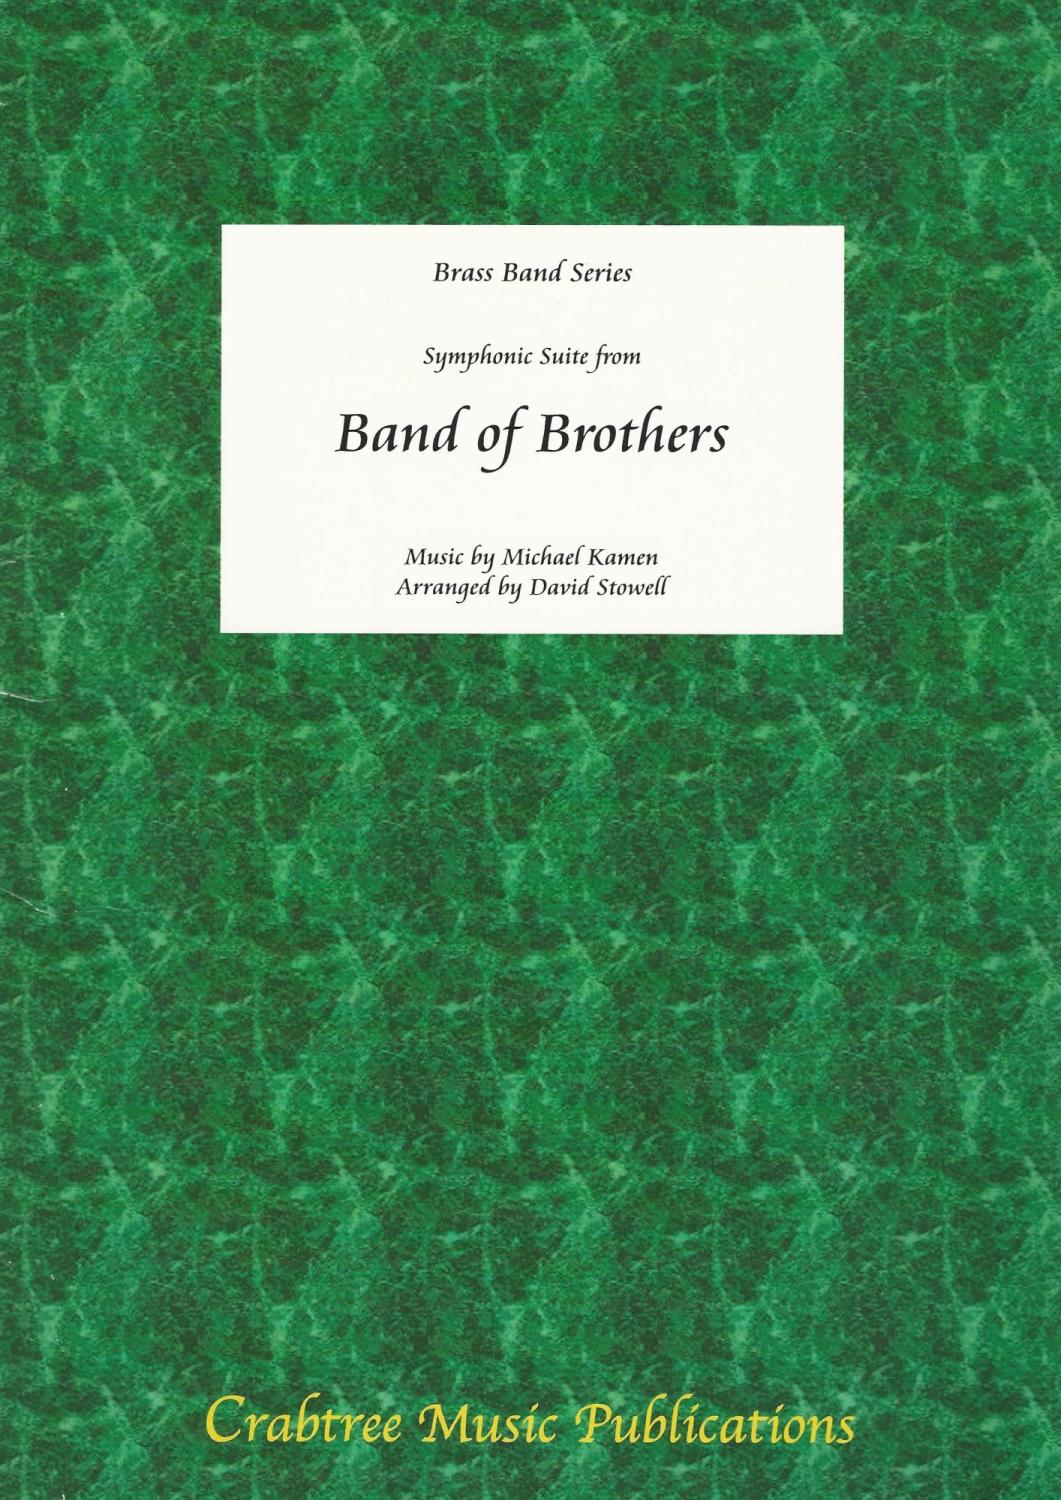 Band of Brothers for Brass Band - Michael Kamen, arr. David Stowell